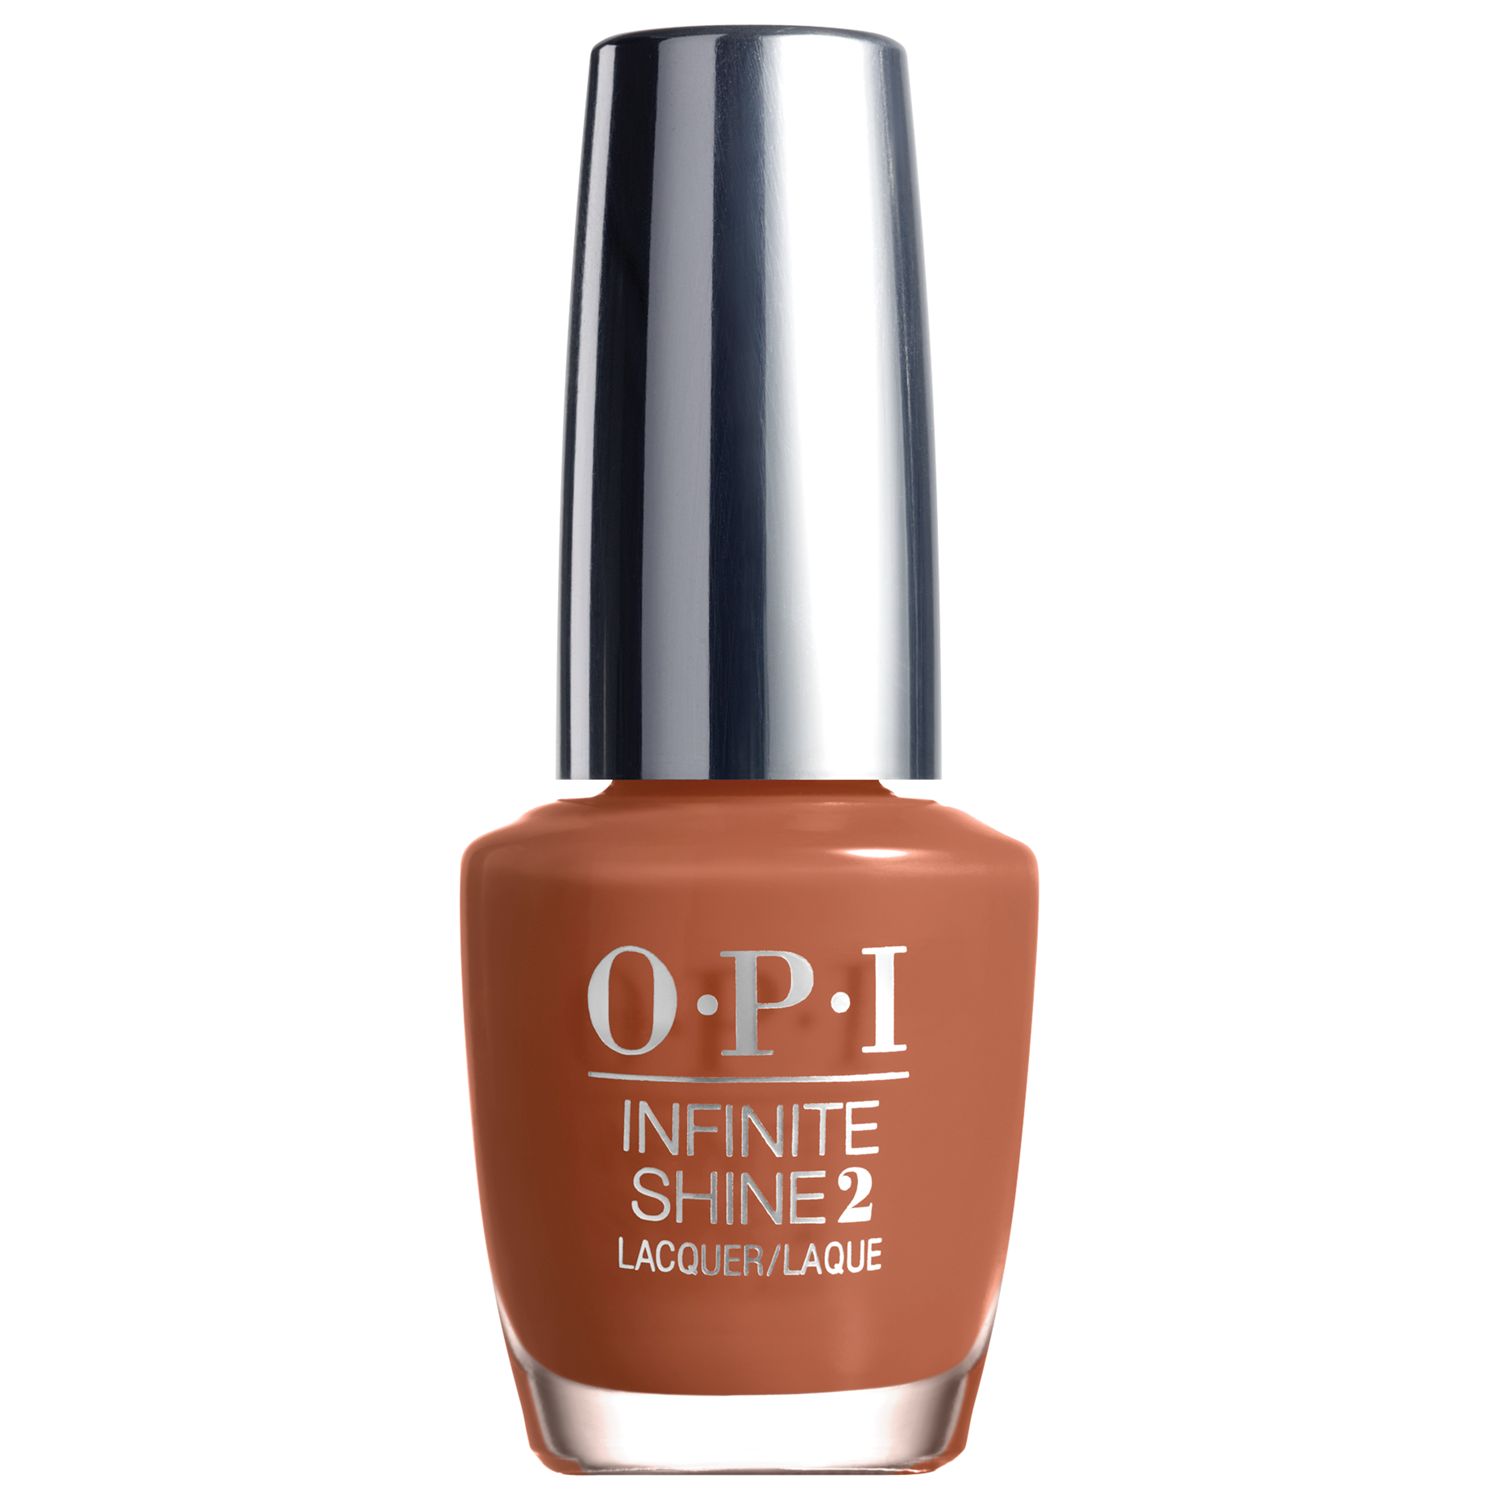 Opi Infinite Shine 2 Nail Lacquer 15ml At John Lewis And Partners